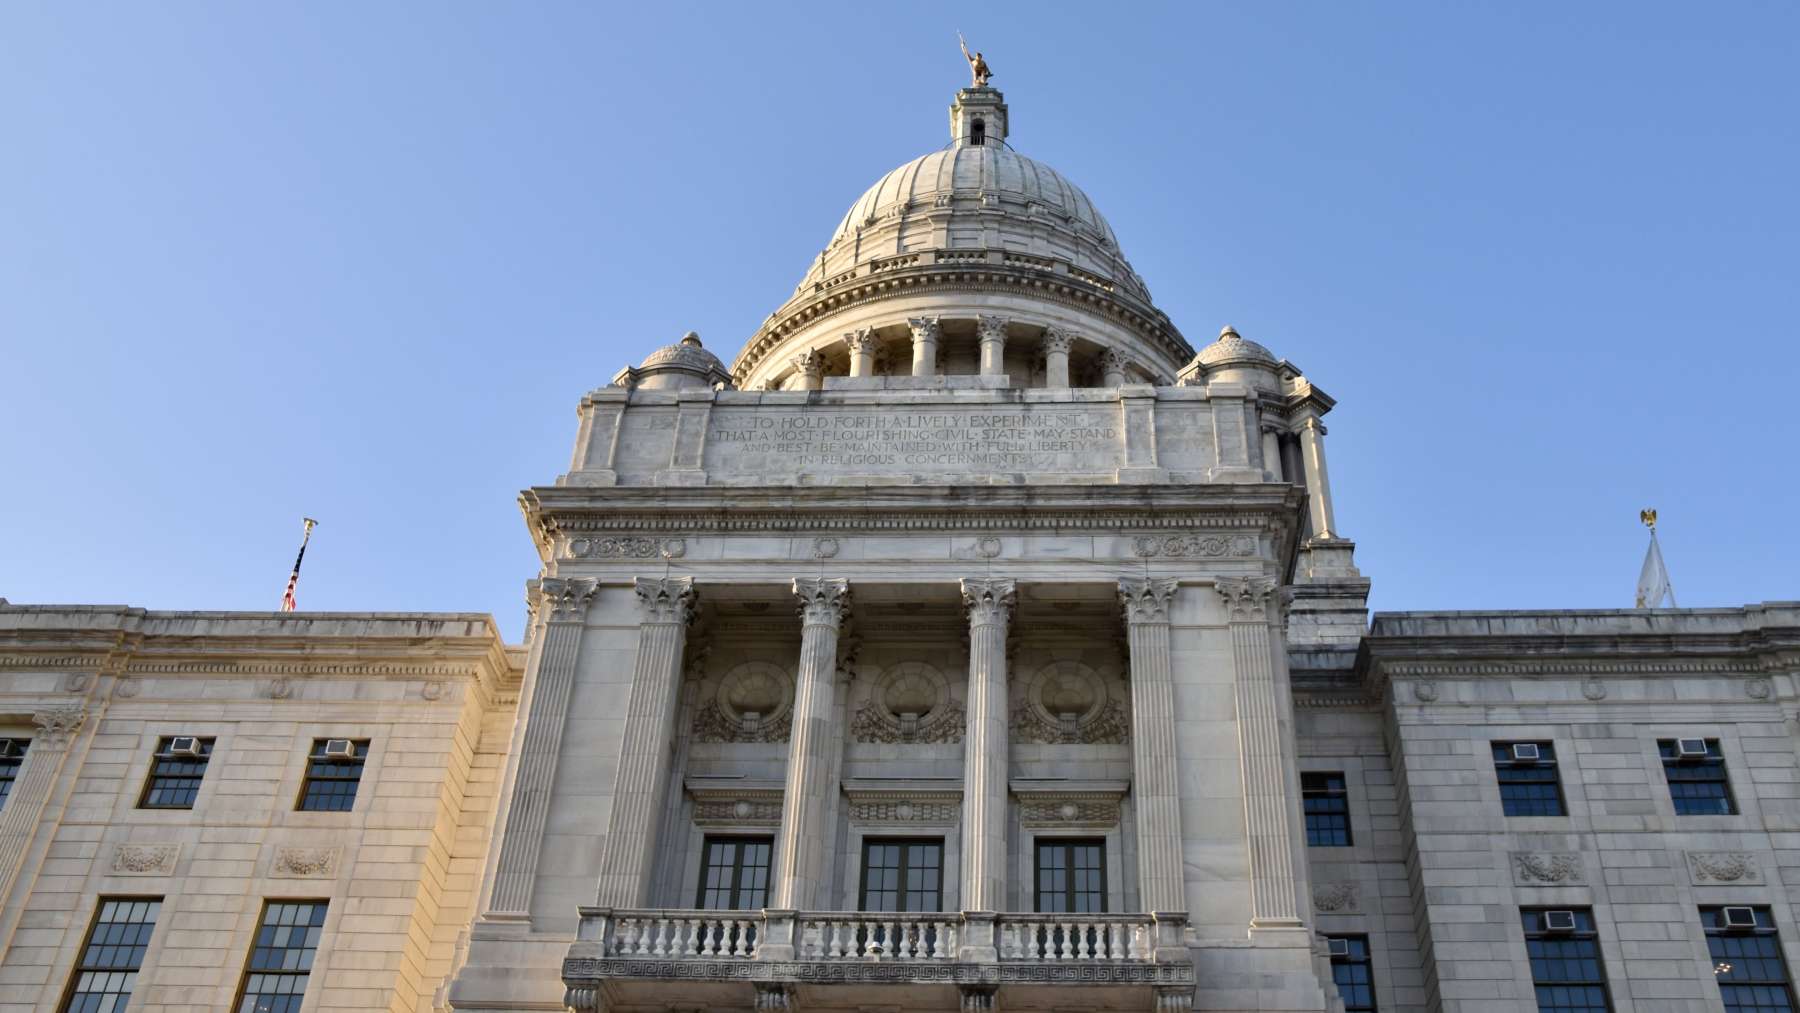 Rhode Island State House Tuesday, April 27, 2021